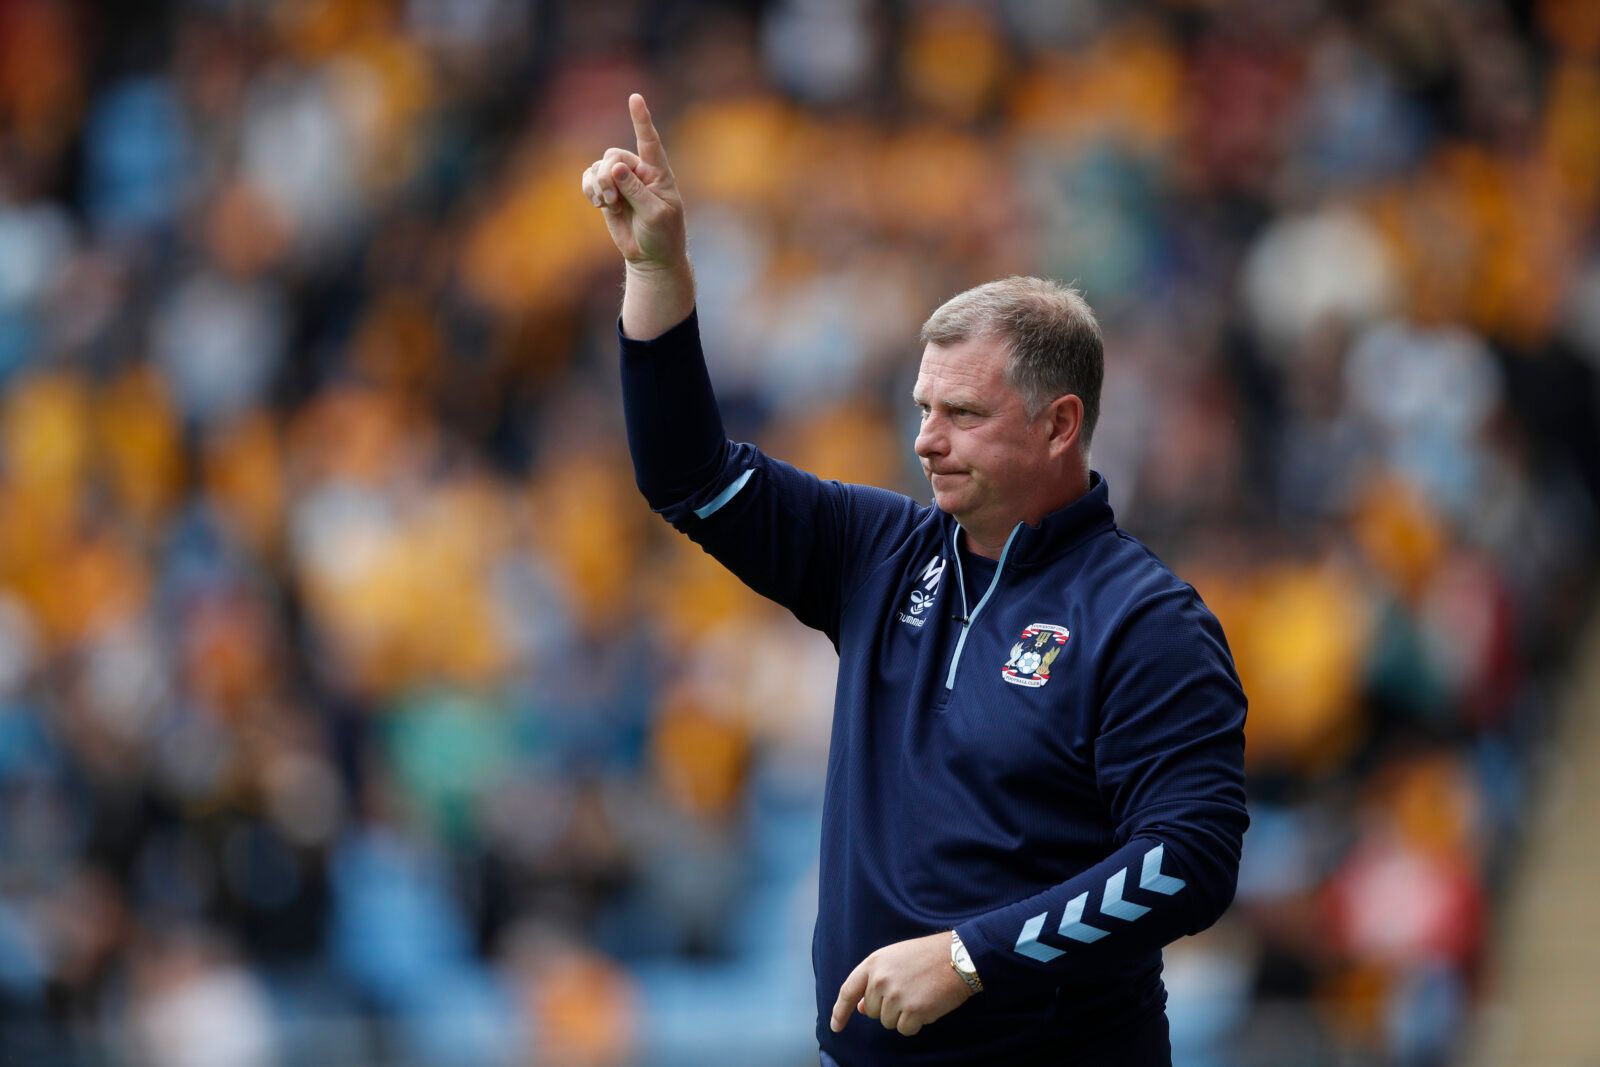 Soccer Football - Pre Season Friendly - Coventry City v Wolverhampton Wanderers - Coventry Building Society Arena, Coventry, Britain - August 1, 2021 Coventry City manager Mark Robins Action Images via Reuters/Paul Childs